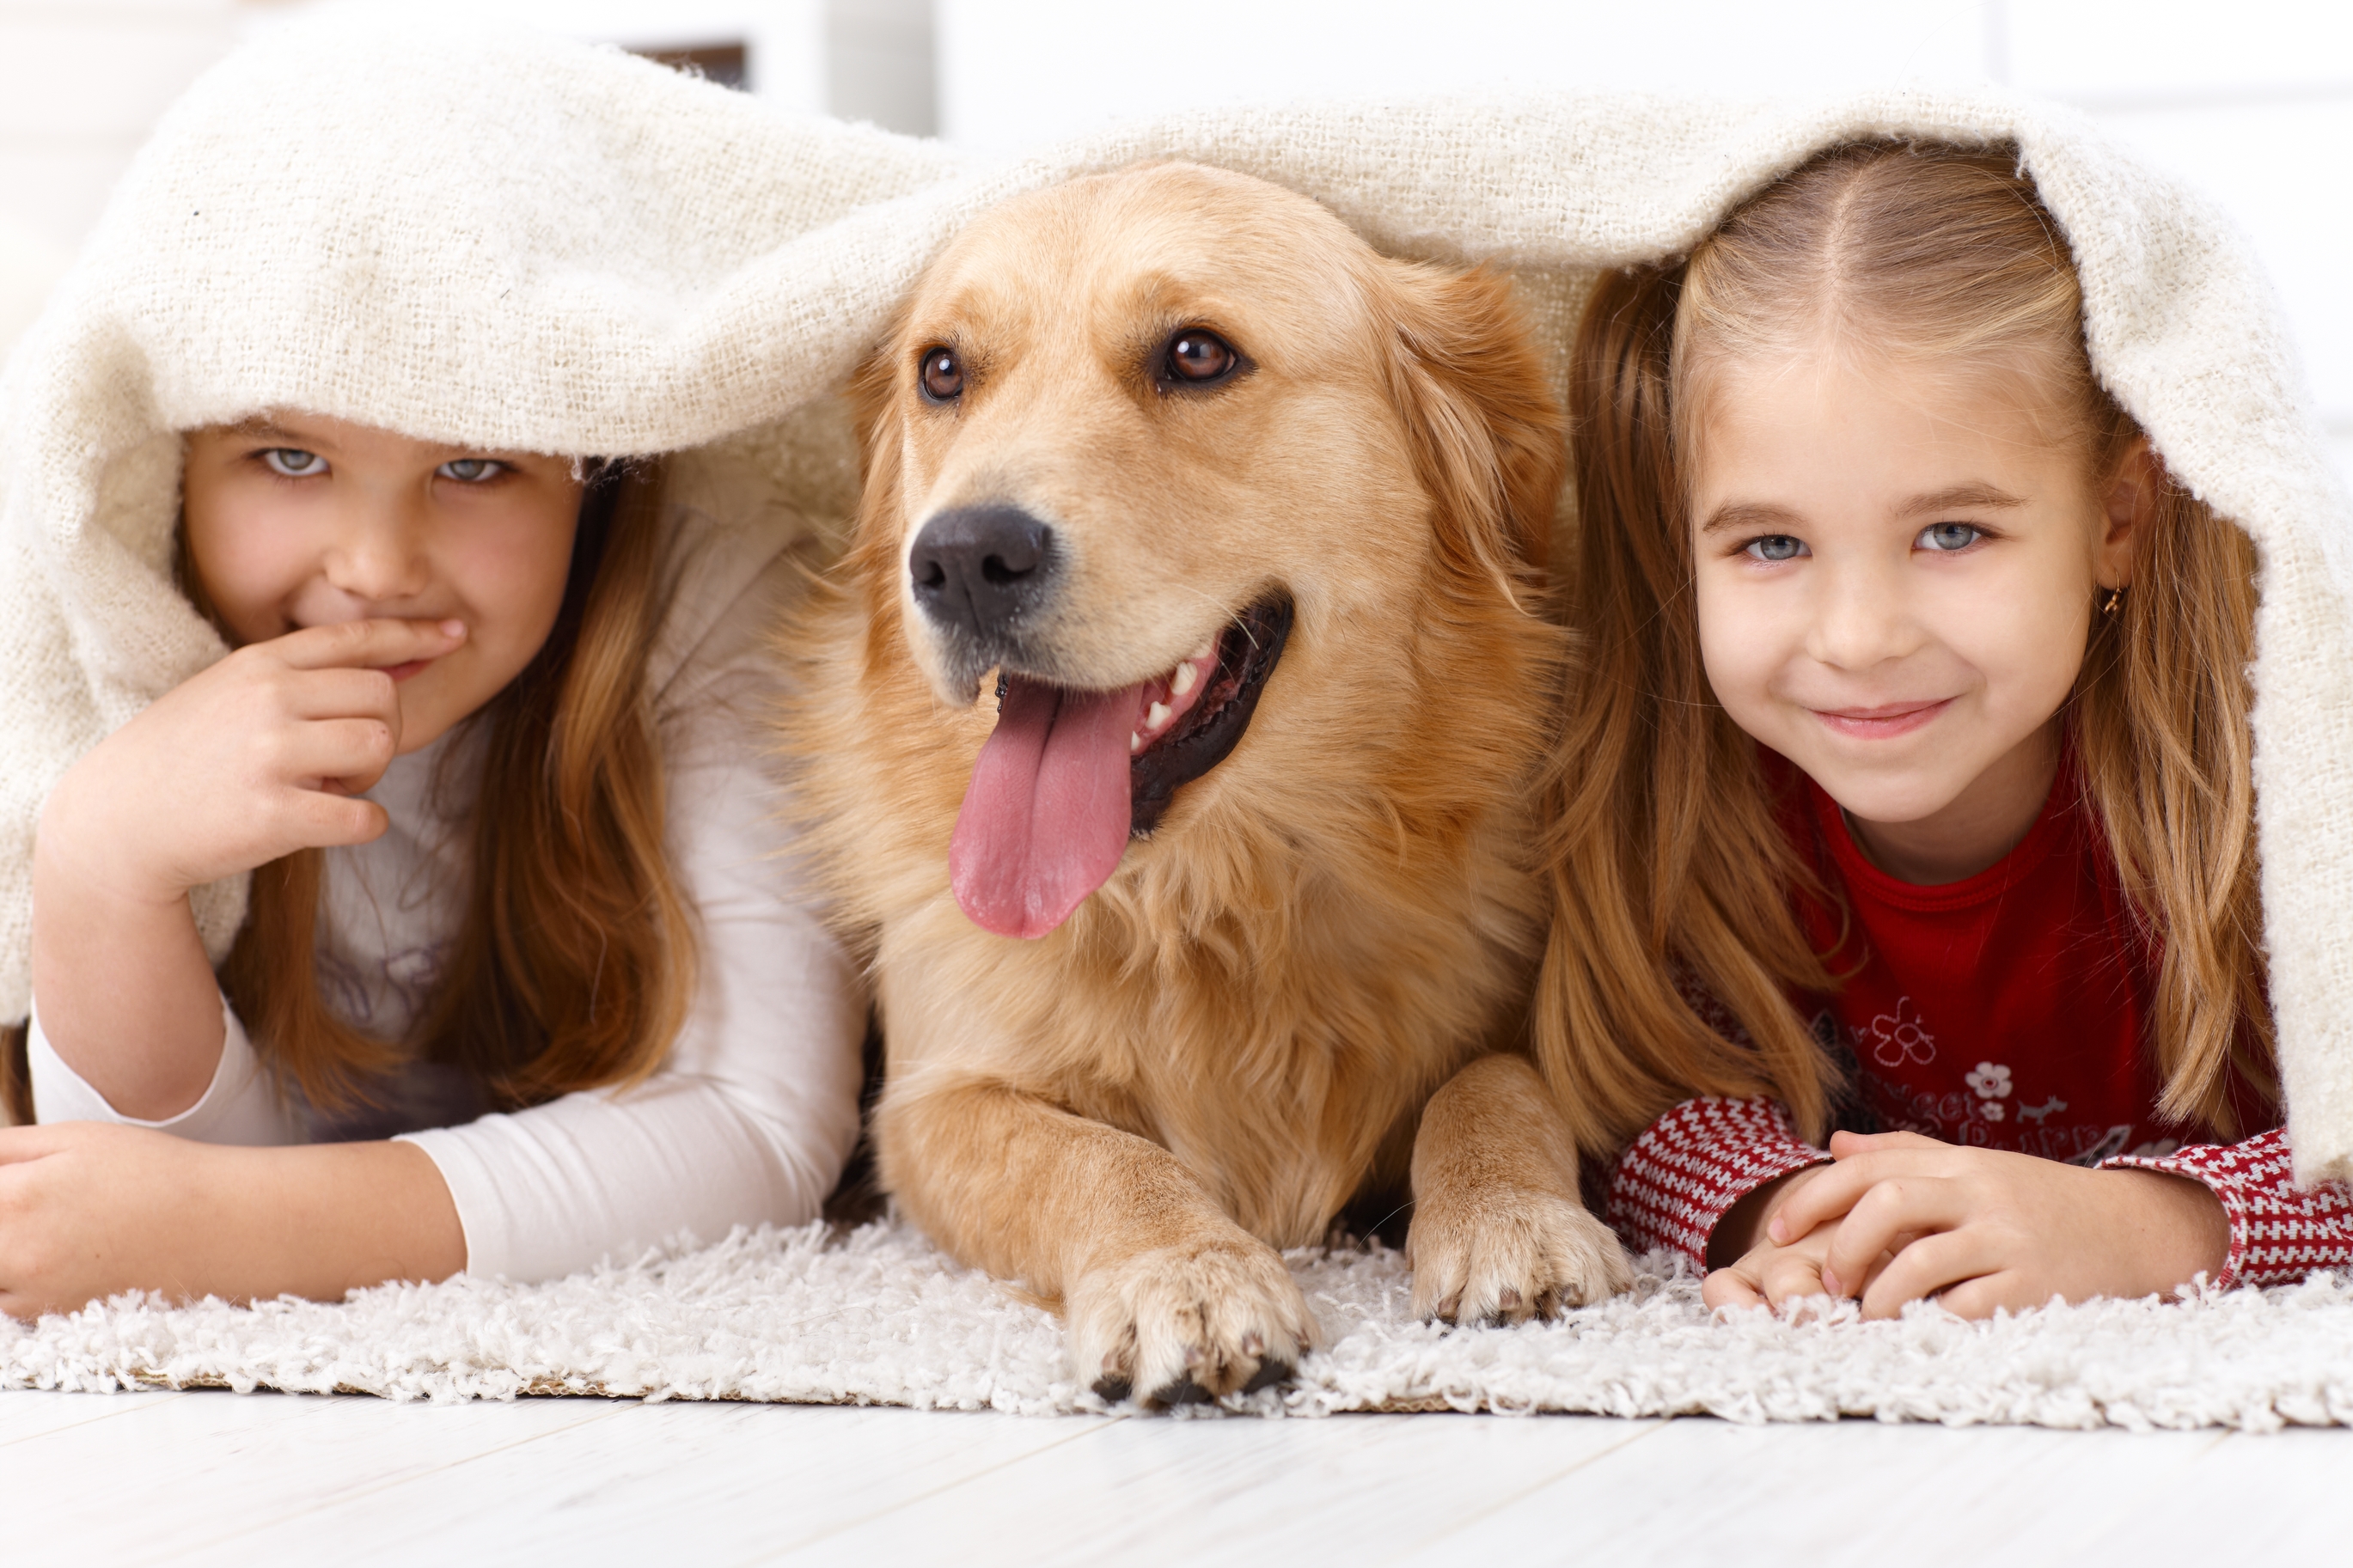 two girls and a brown dog covering in a white blanket